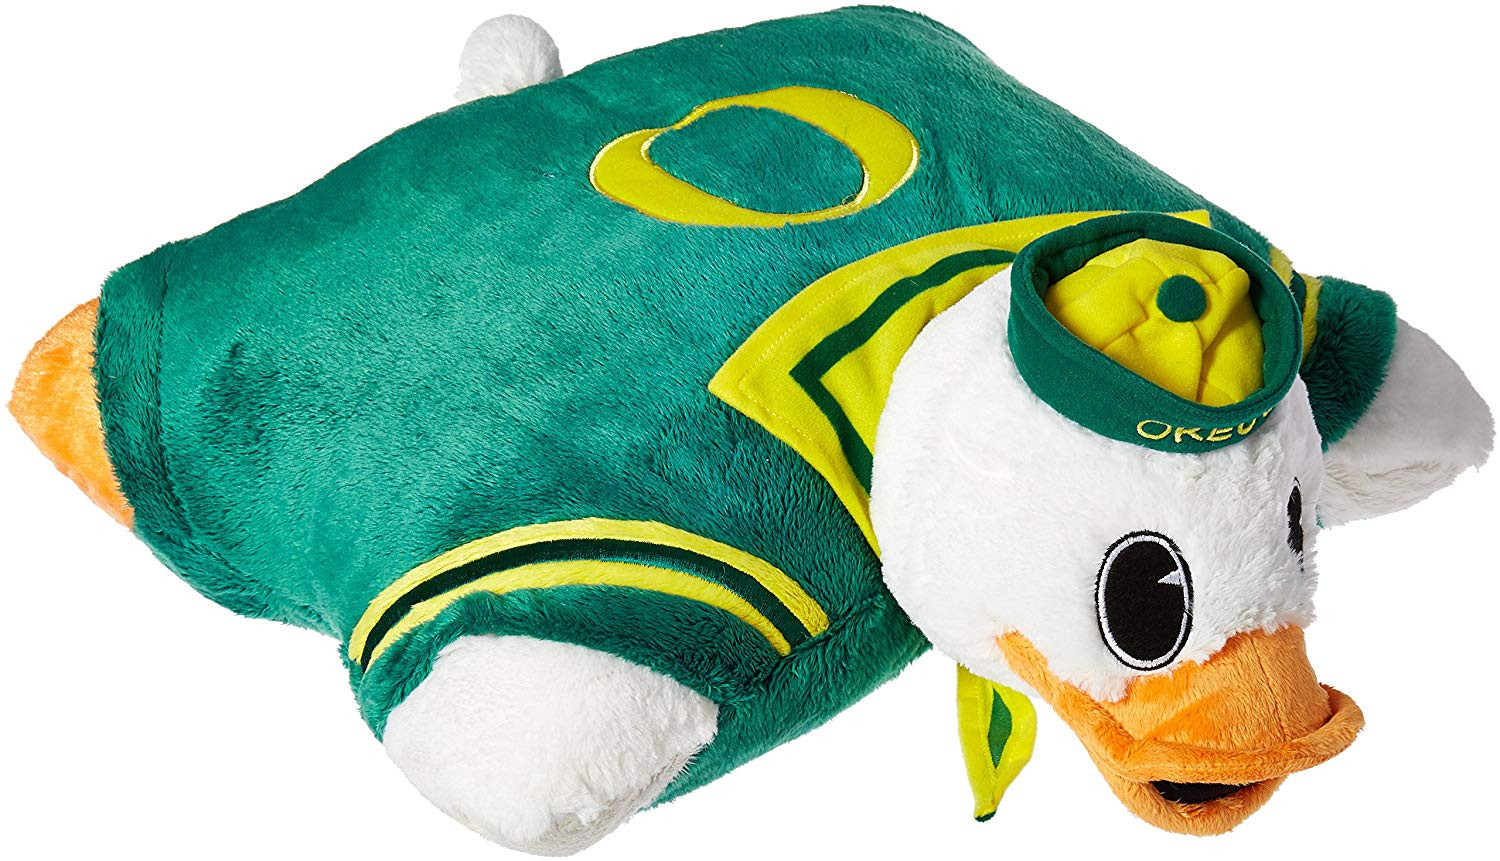 where-sells-pillow-pets-of-amazon-com-ncaa-michigan-state-spartans-pillow-pet-sports-outdoors-inside-91iqnrbdcgl-sl1500